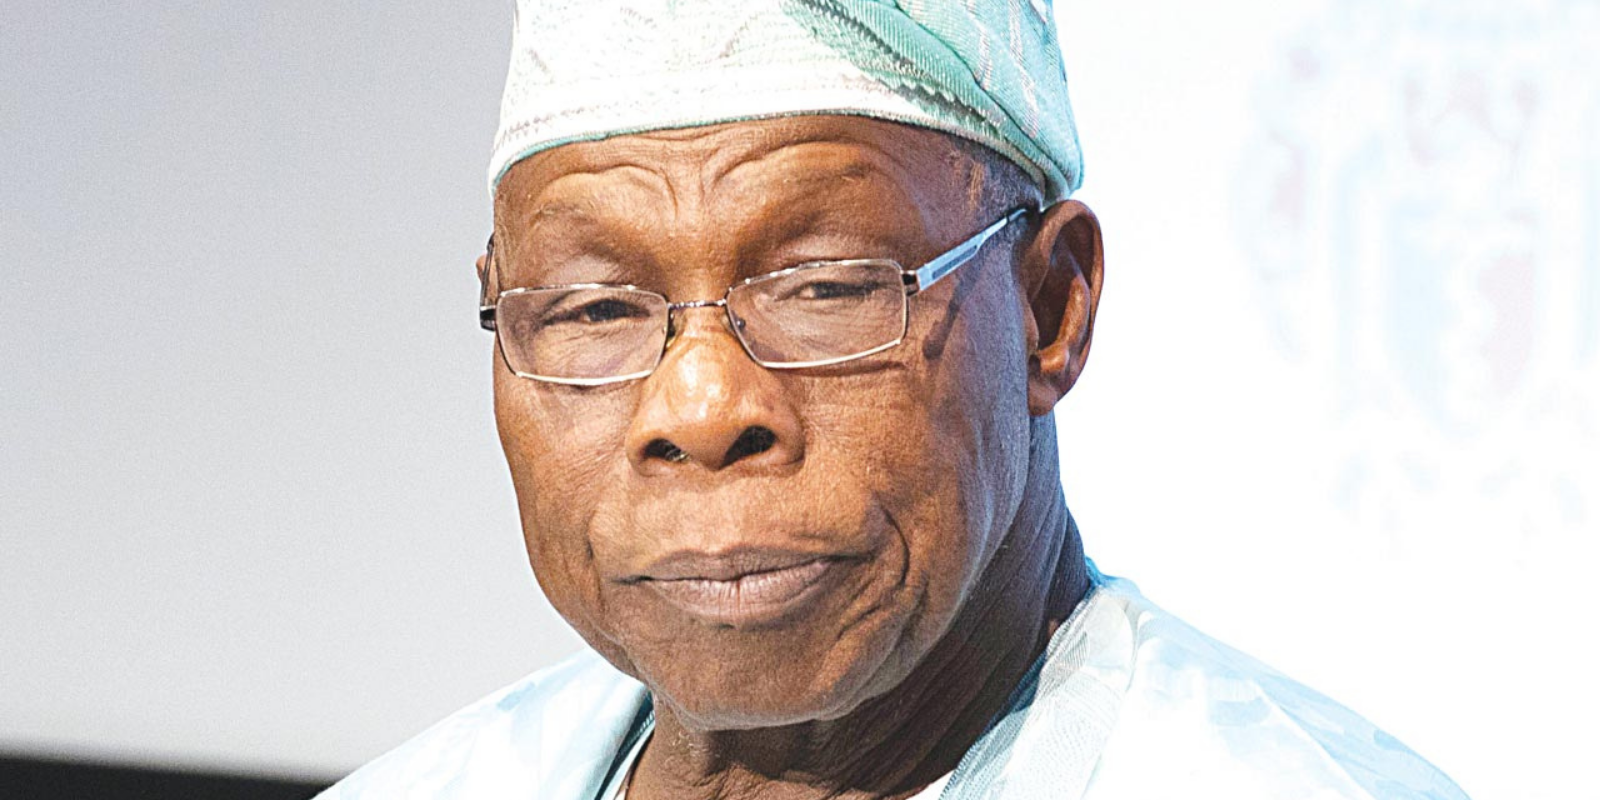 Olusegun Obasanjo was the governor of which state?